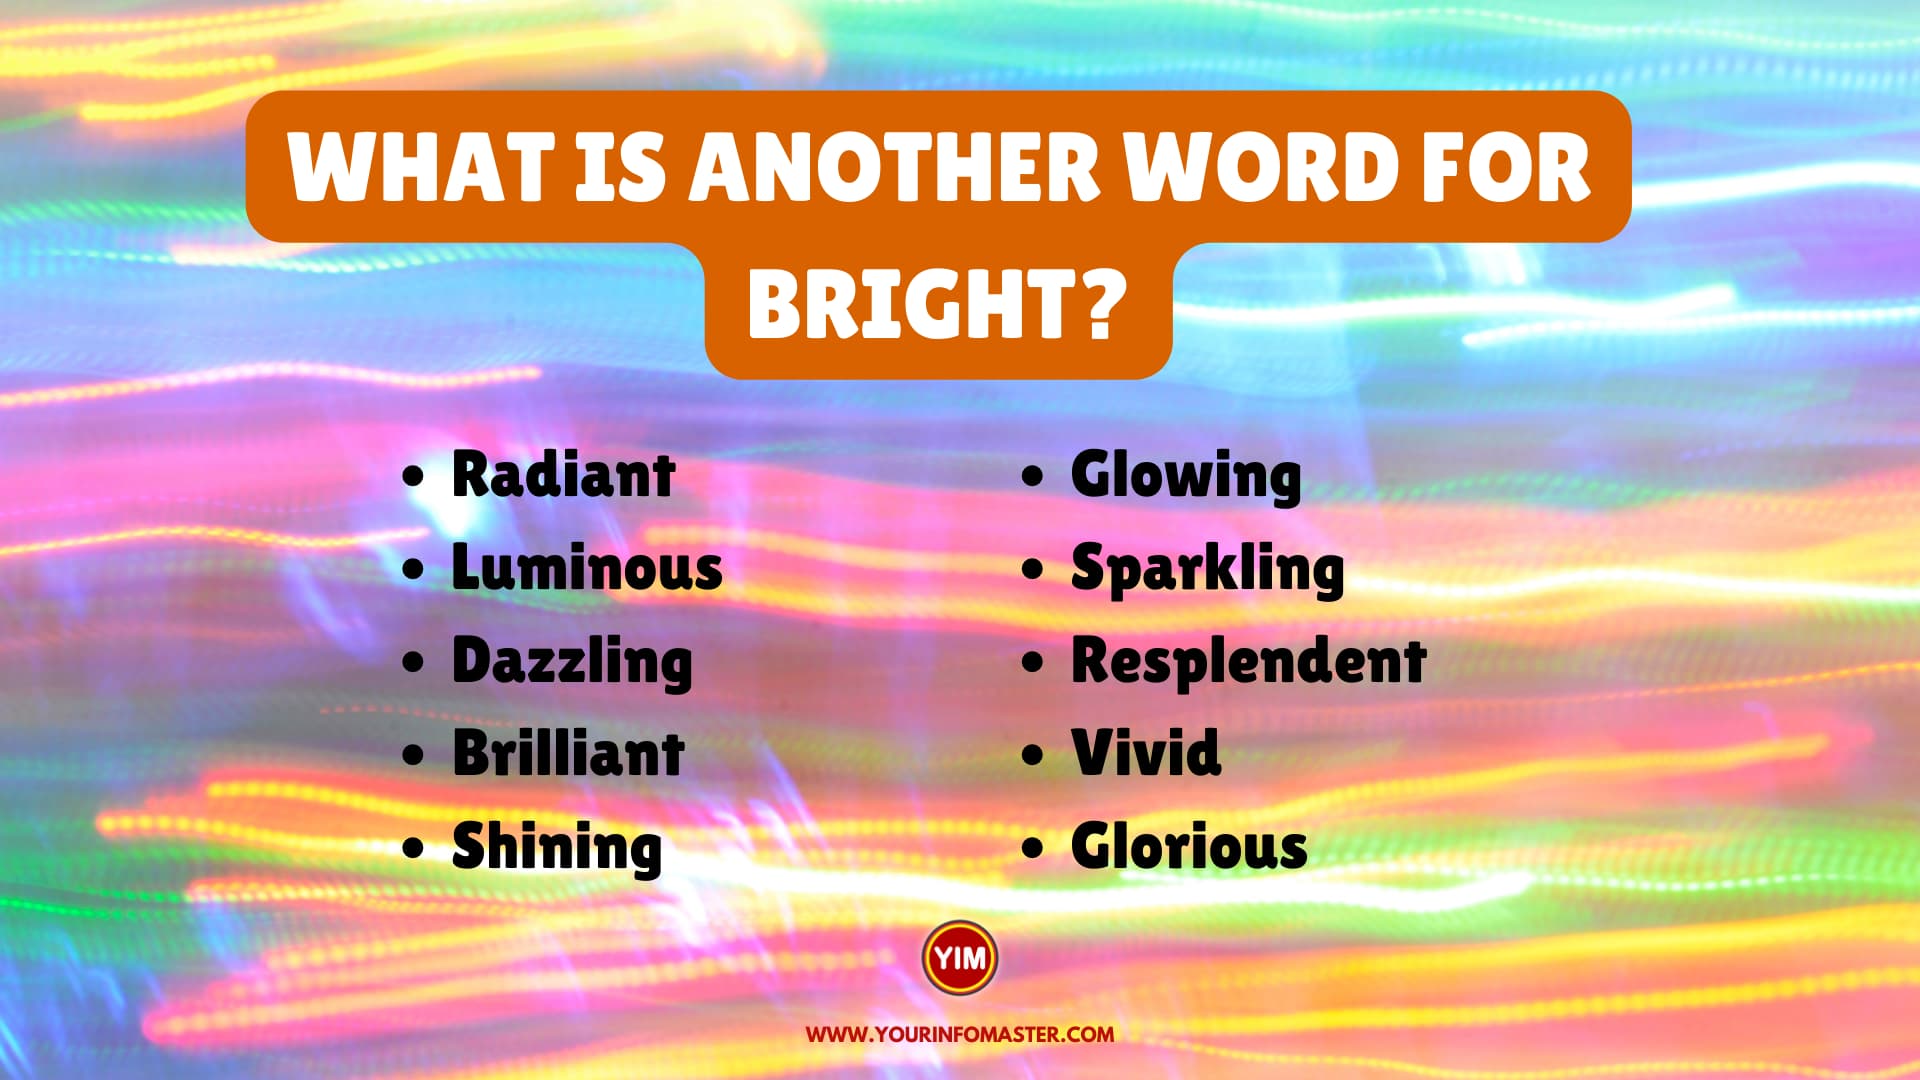 What is another word for Bright